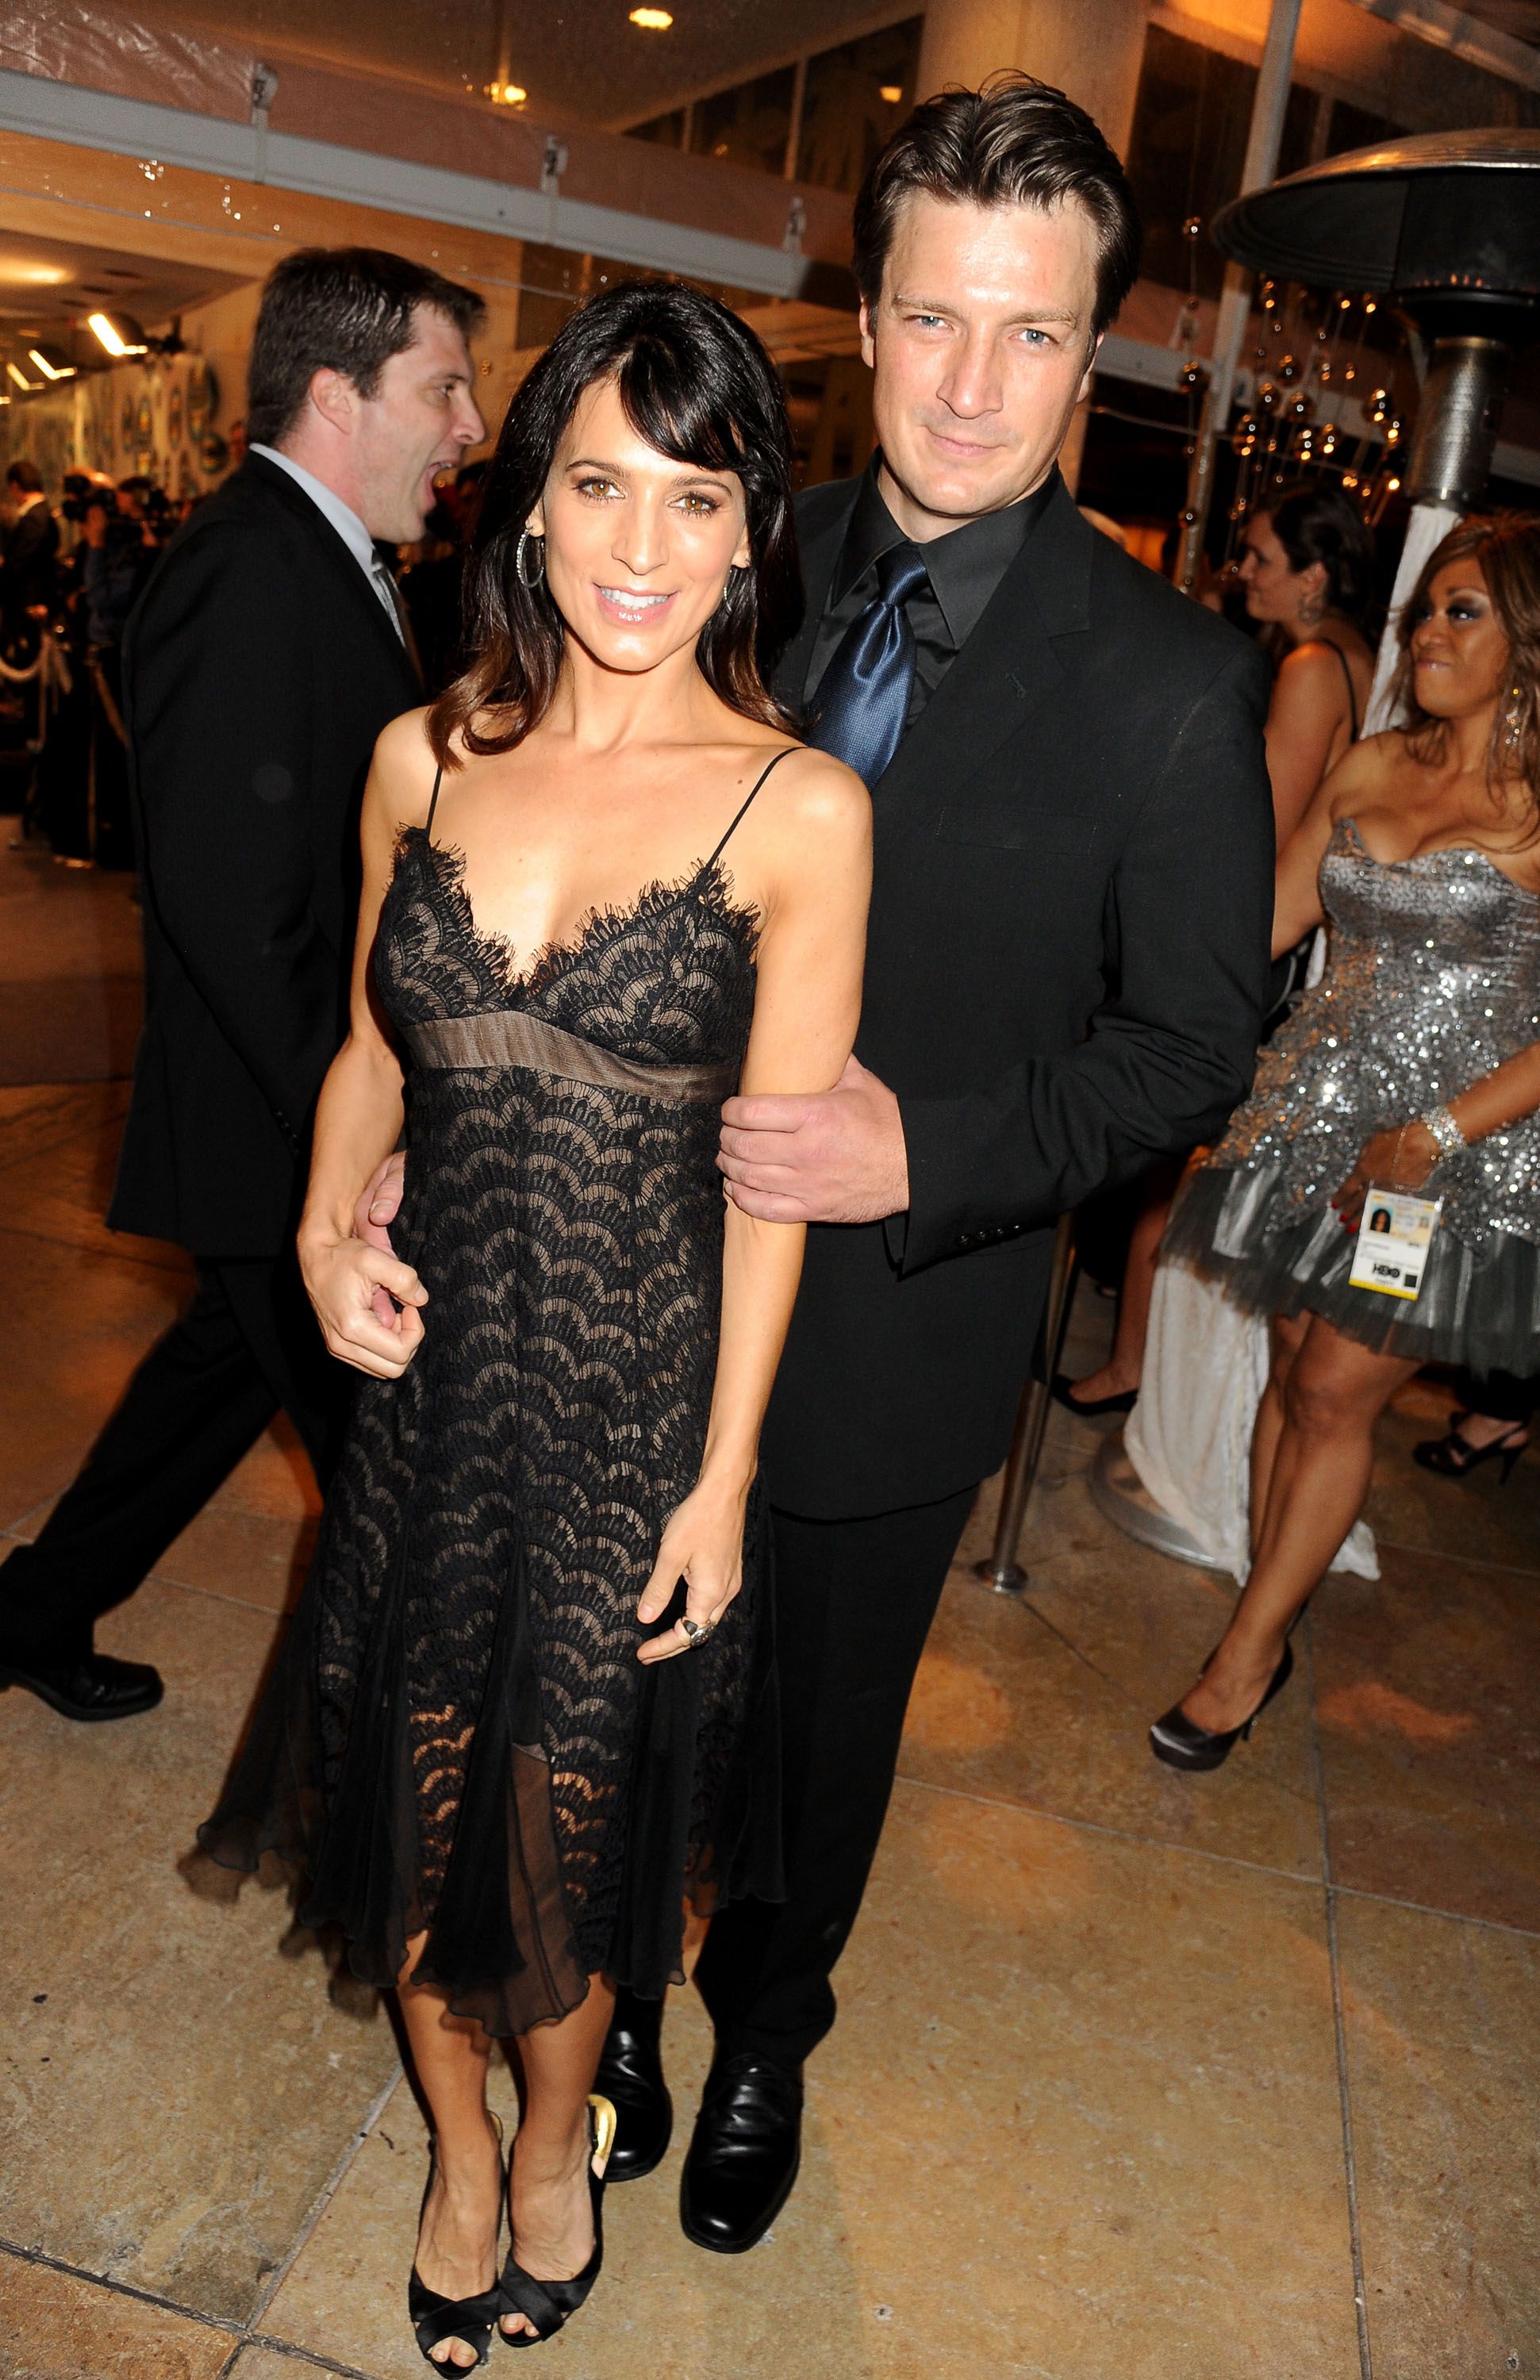 Perrey Reeves and Nathan Fillion during HBO's Official After Party for the 69th Annual Golden Globe Awards held at The Beverly Hilton hotel on January 15, 2012 in Beverly Hills, California. | Source: Getty Images